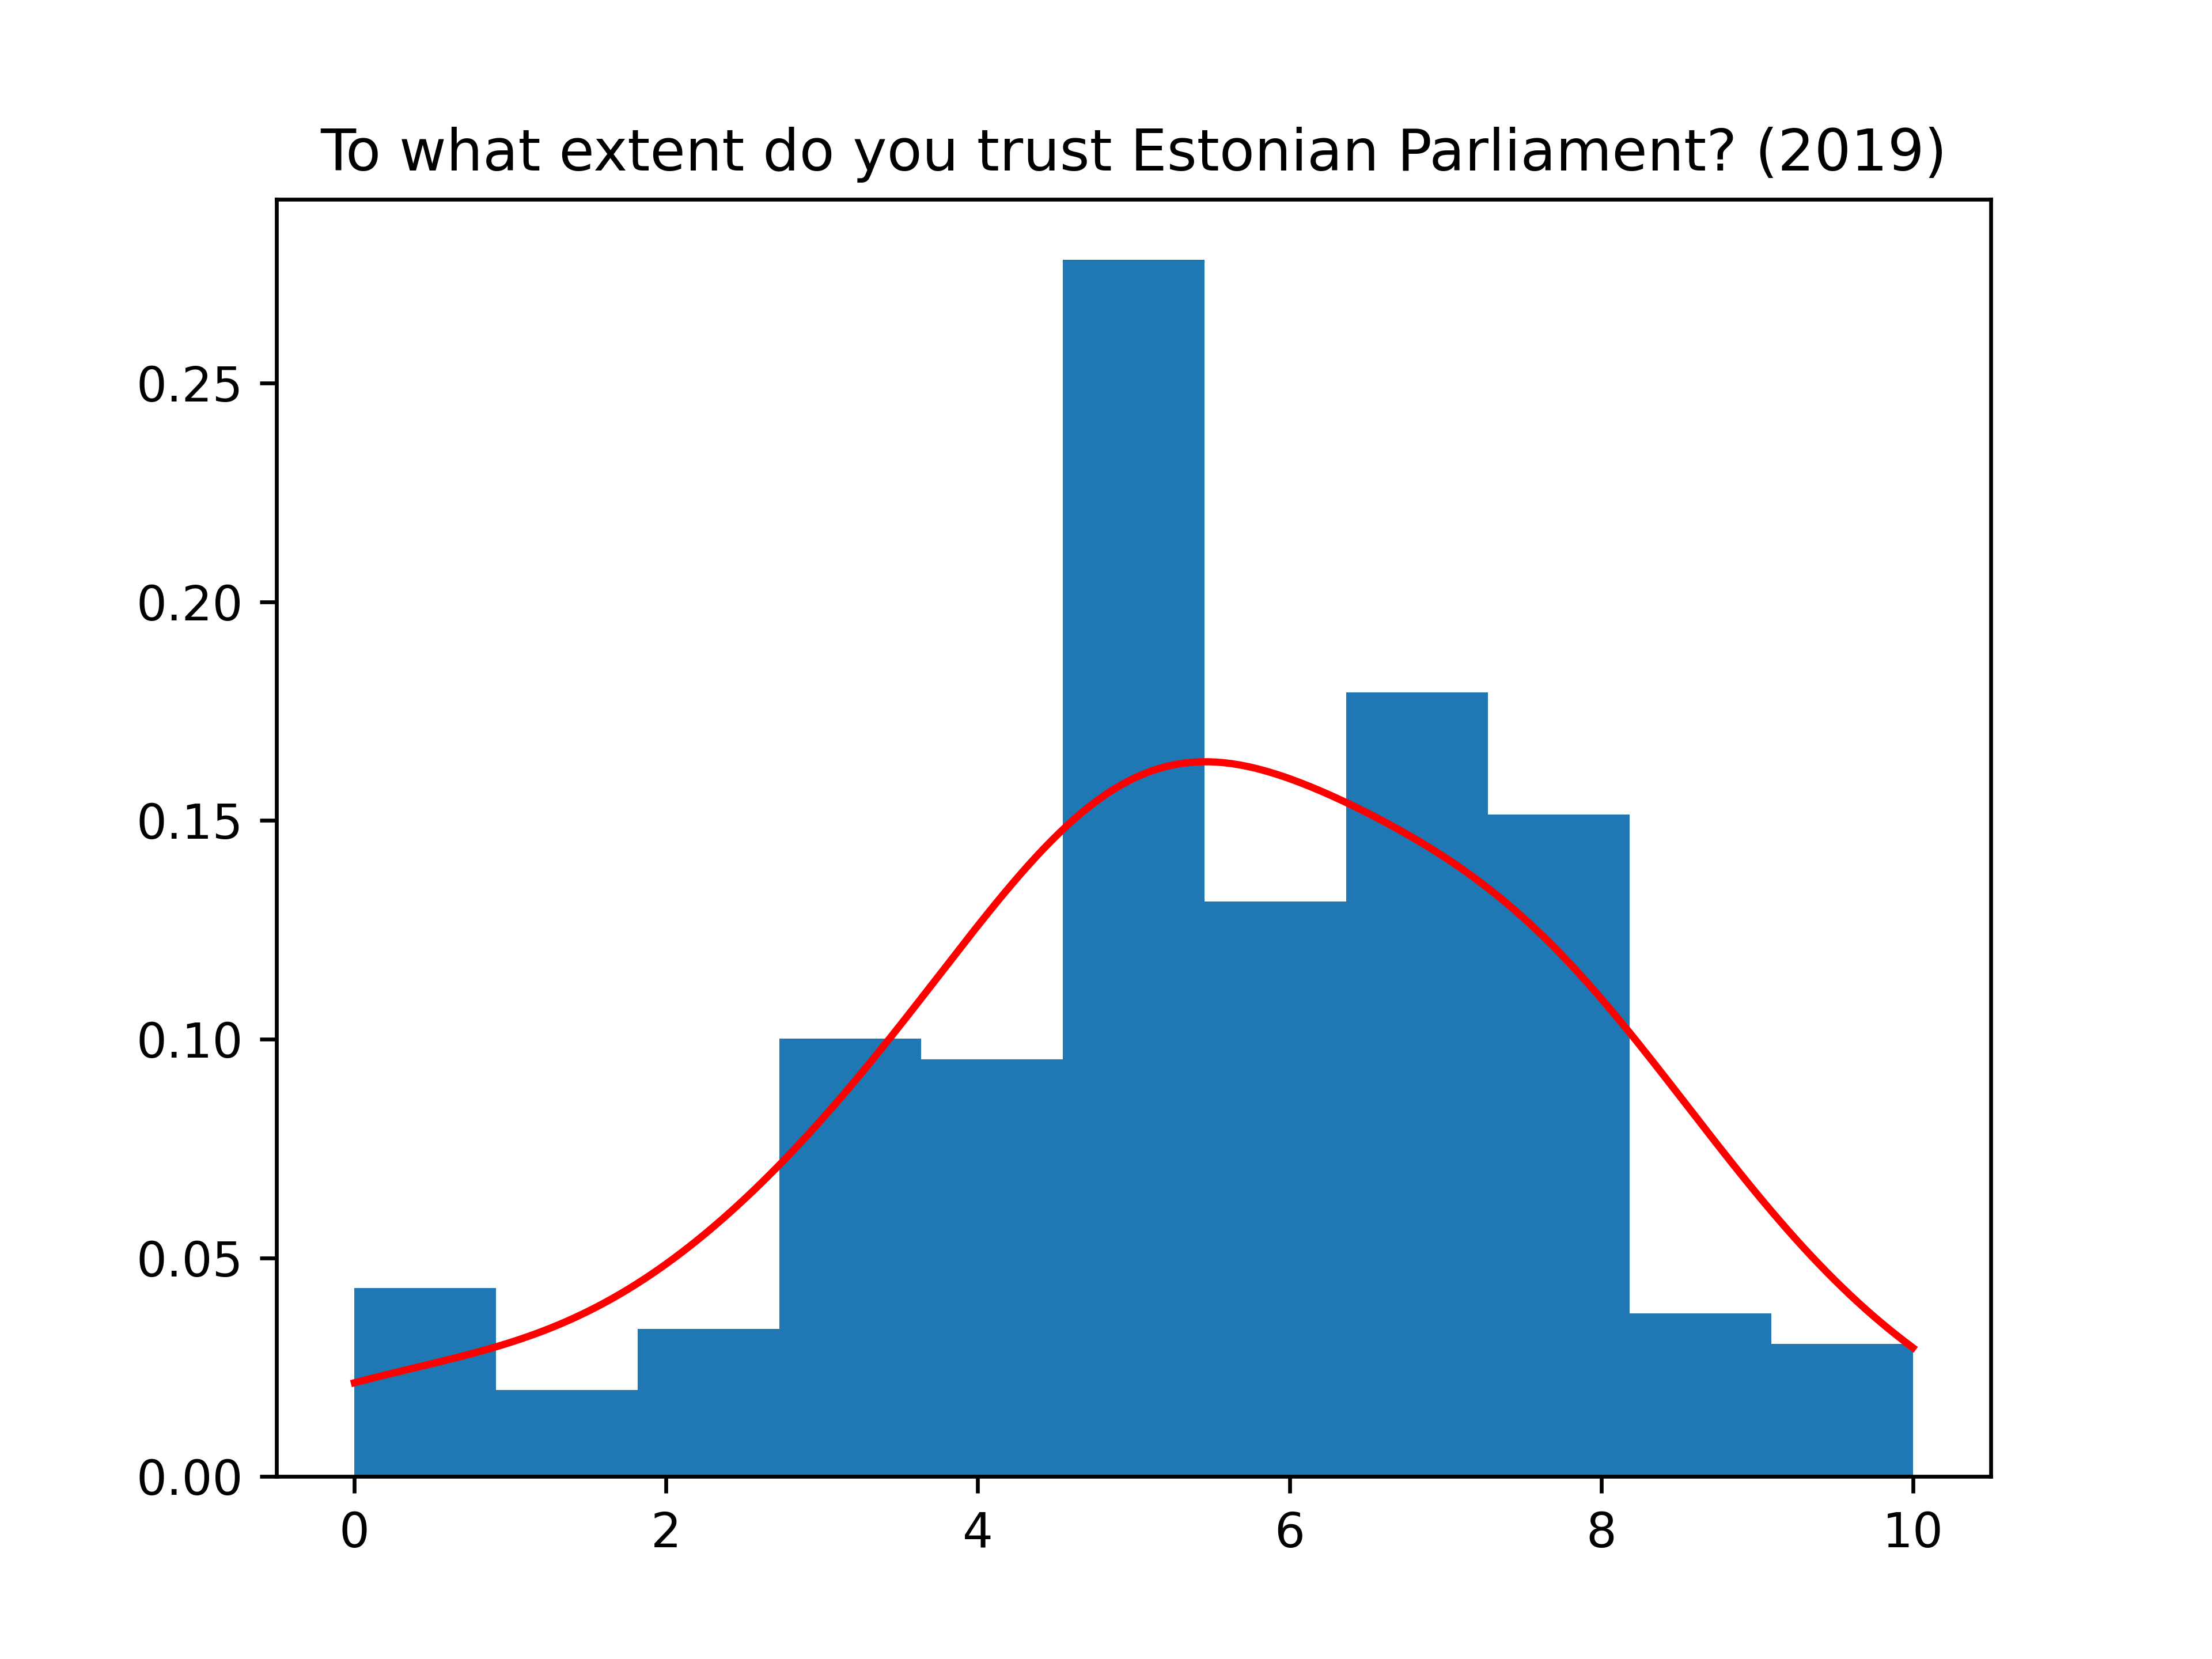 Normal trust curves of Estonian Parliament in 2013 and 2019 (the same questionnaire)